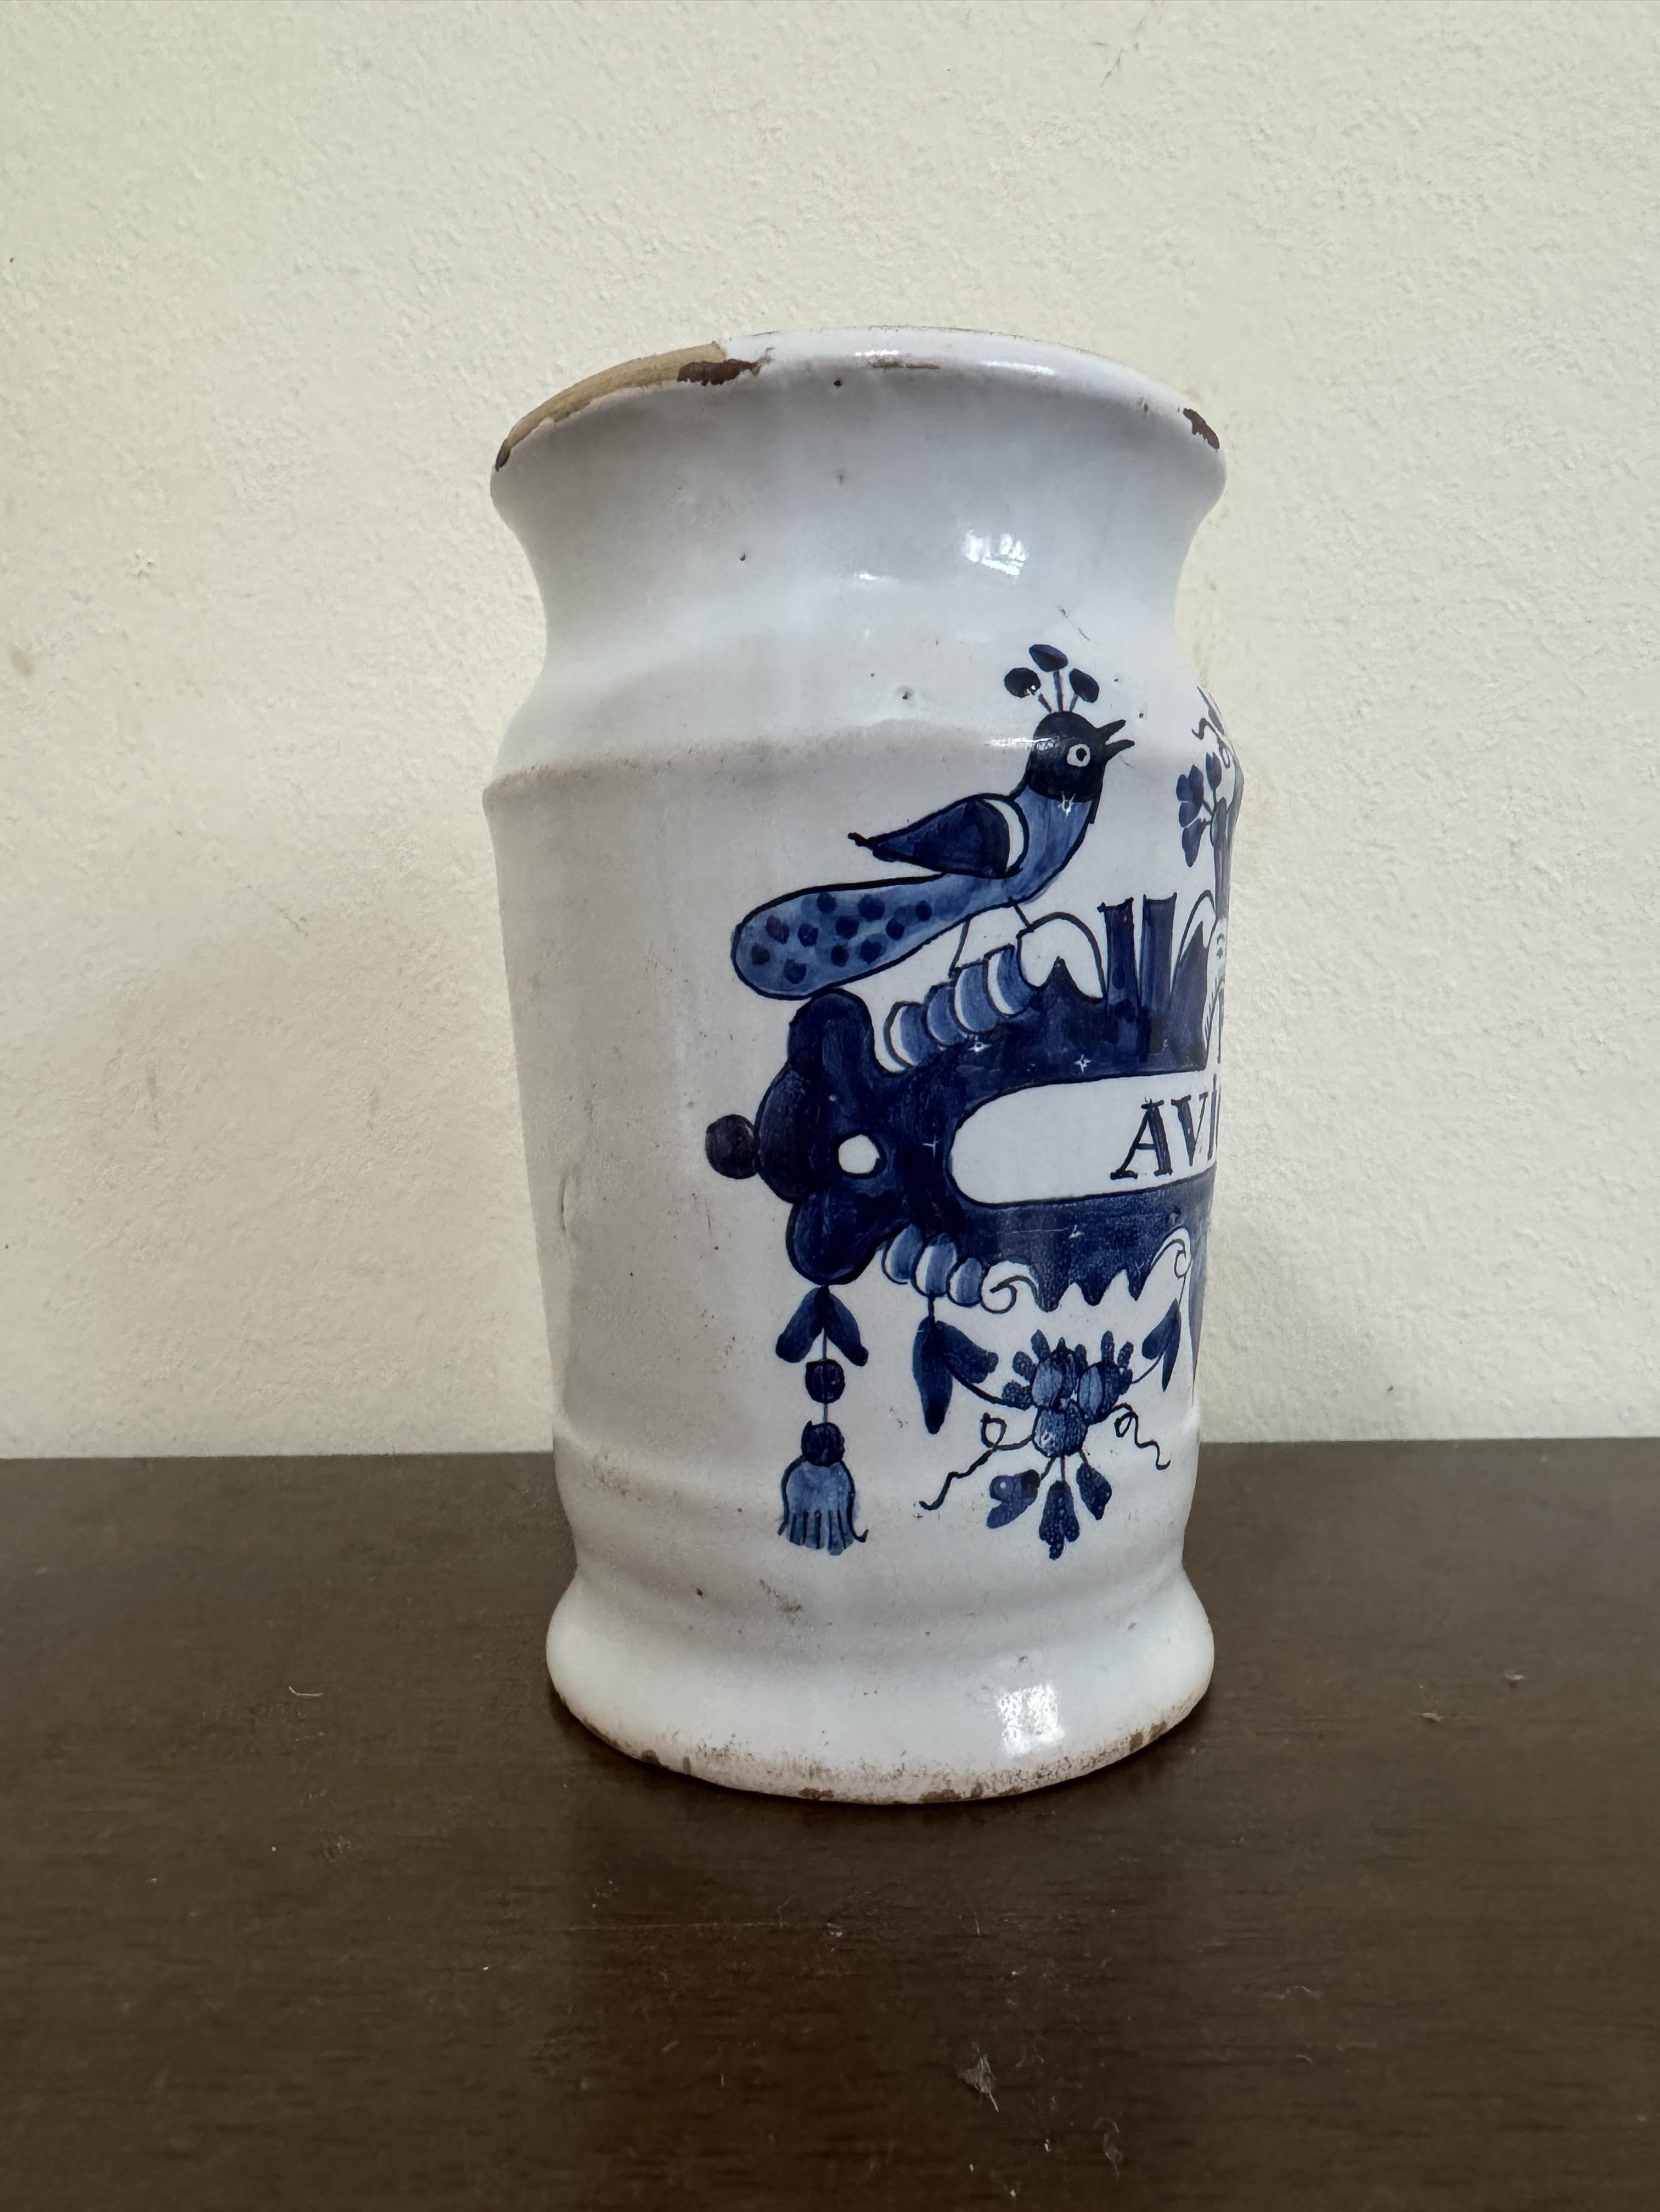 A good Dutch Delft blue and white pottery apothecary jar marked P.AVICEMA and dating from around 1750. The jar, of cylindrical form stands on a rounded pedestal foot with a pinched top rim and slightly flared top. The jar is hand decorated with a